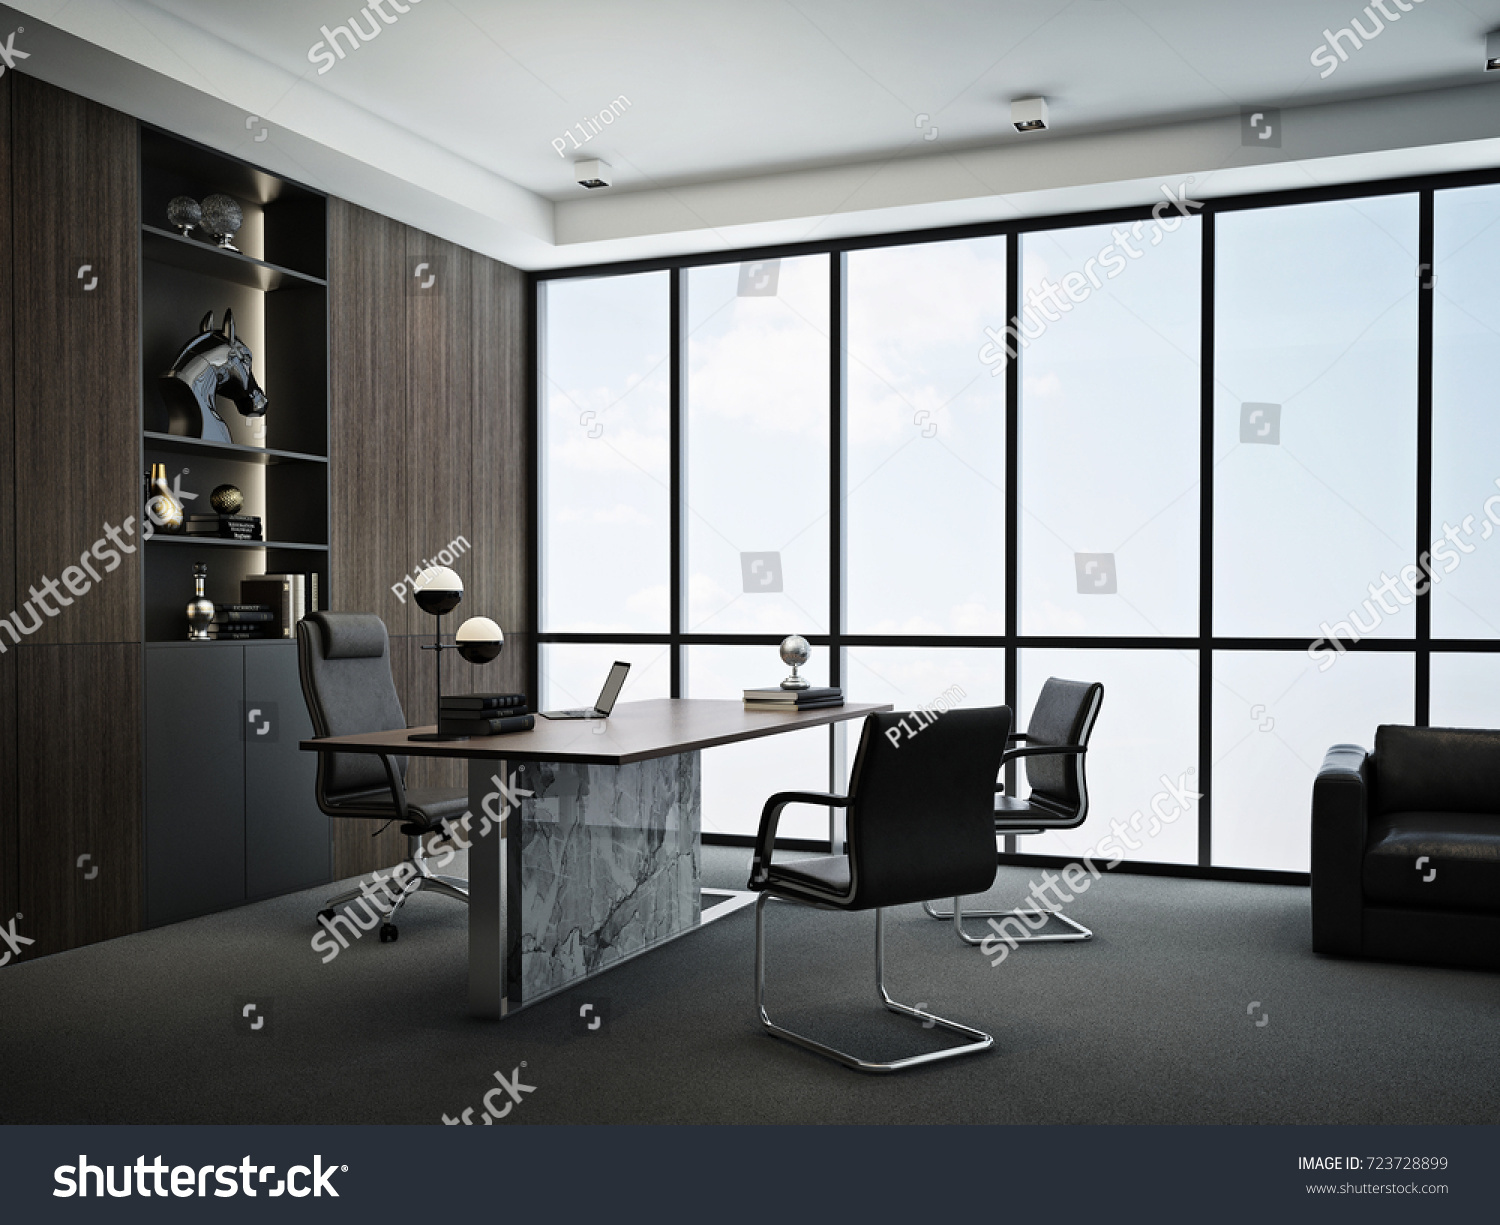 Ceo Office Interior Wood Wall Decoration Royalty Free